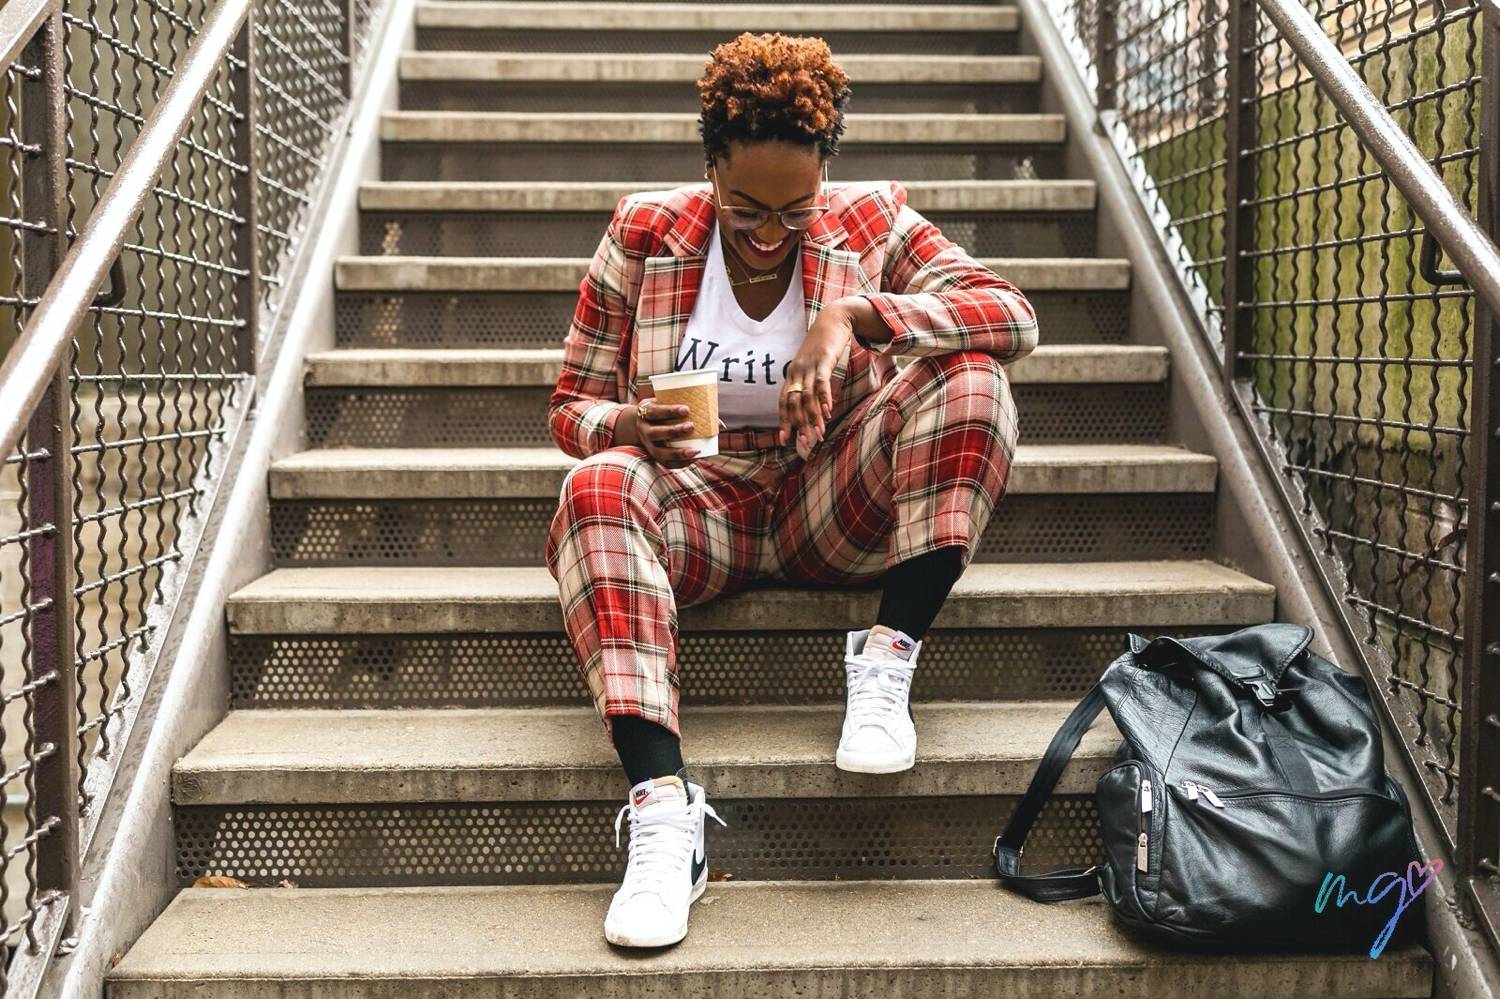 Photo: Mecca Gamble's personal branding portrait of a writer shows the woman wearing a red plaid suit over a t-shirt that says, "Writer". She's sitting on a set of concrete steps, holding a coffee cup, and laughing as she looks down toward her white Nikes.